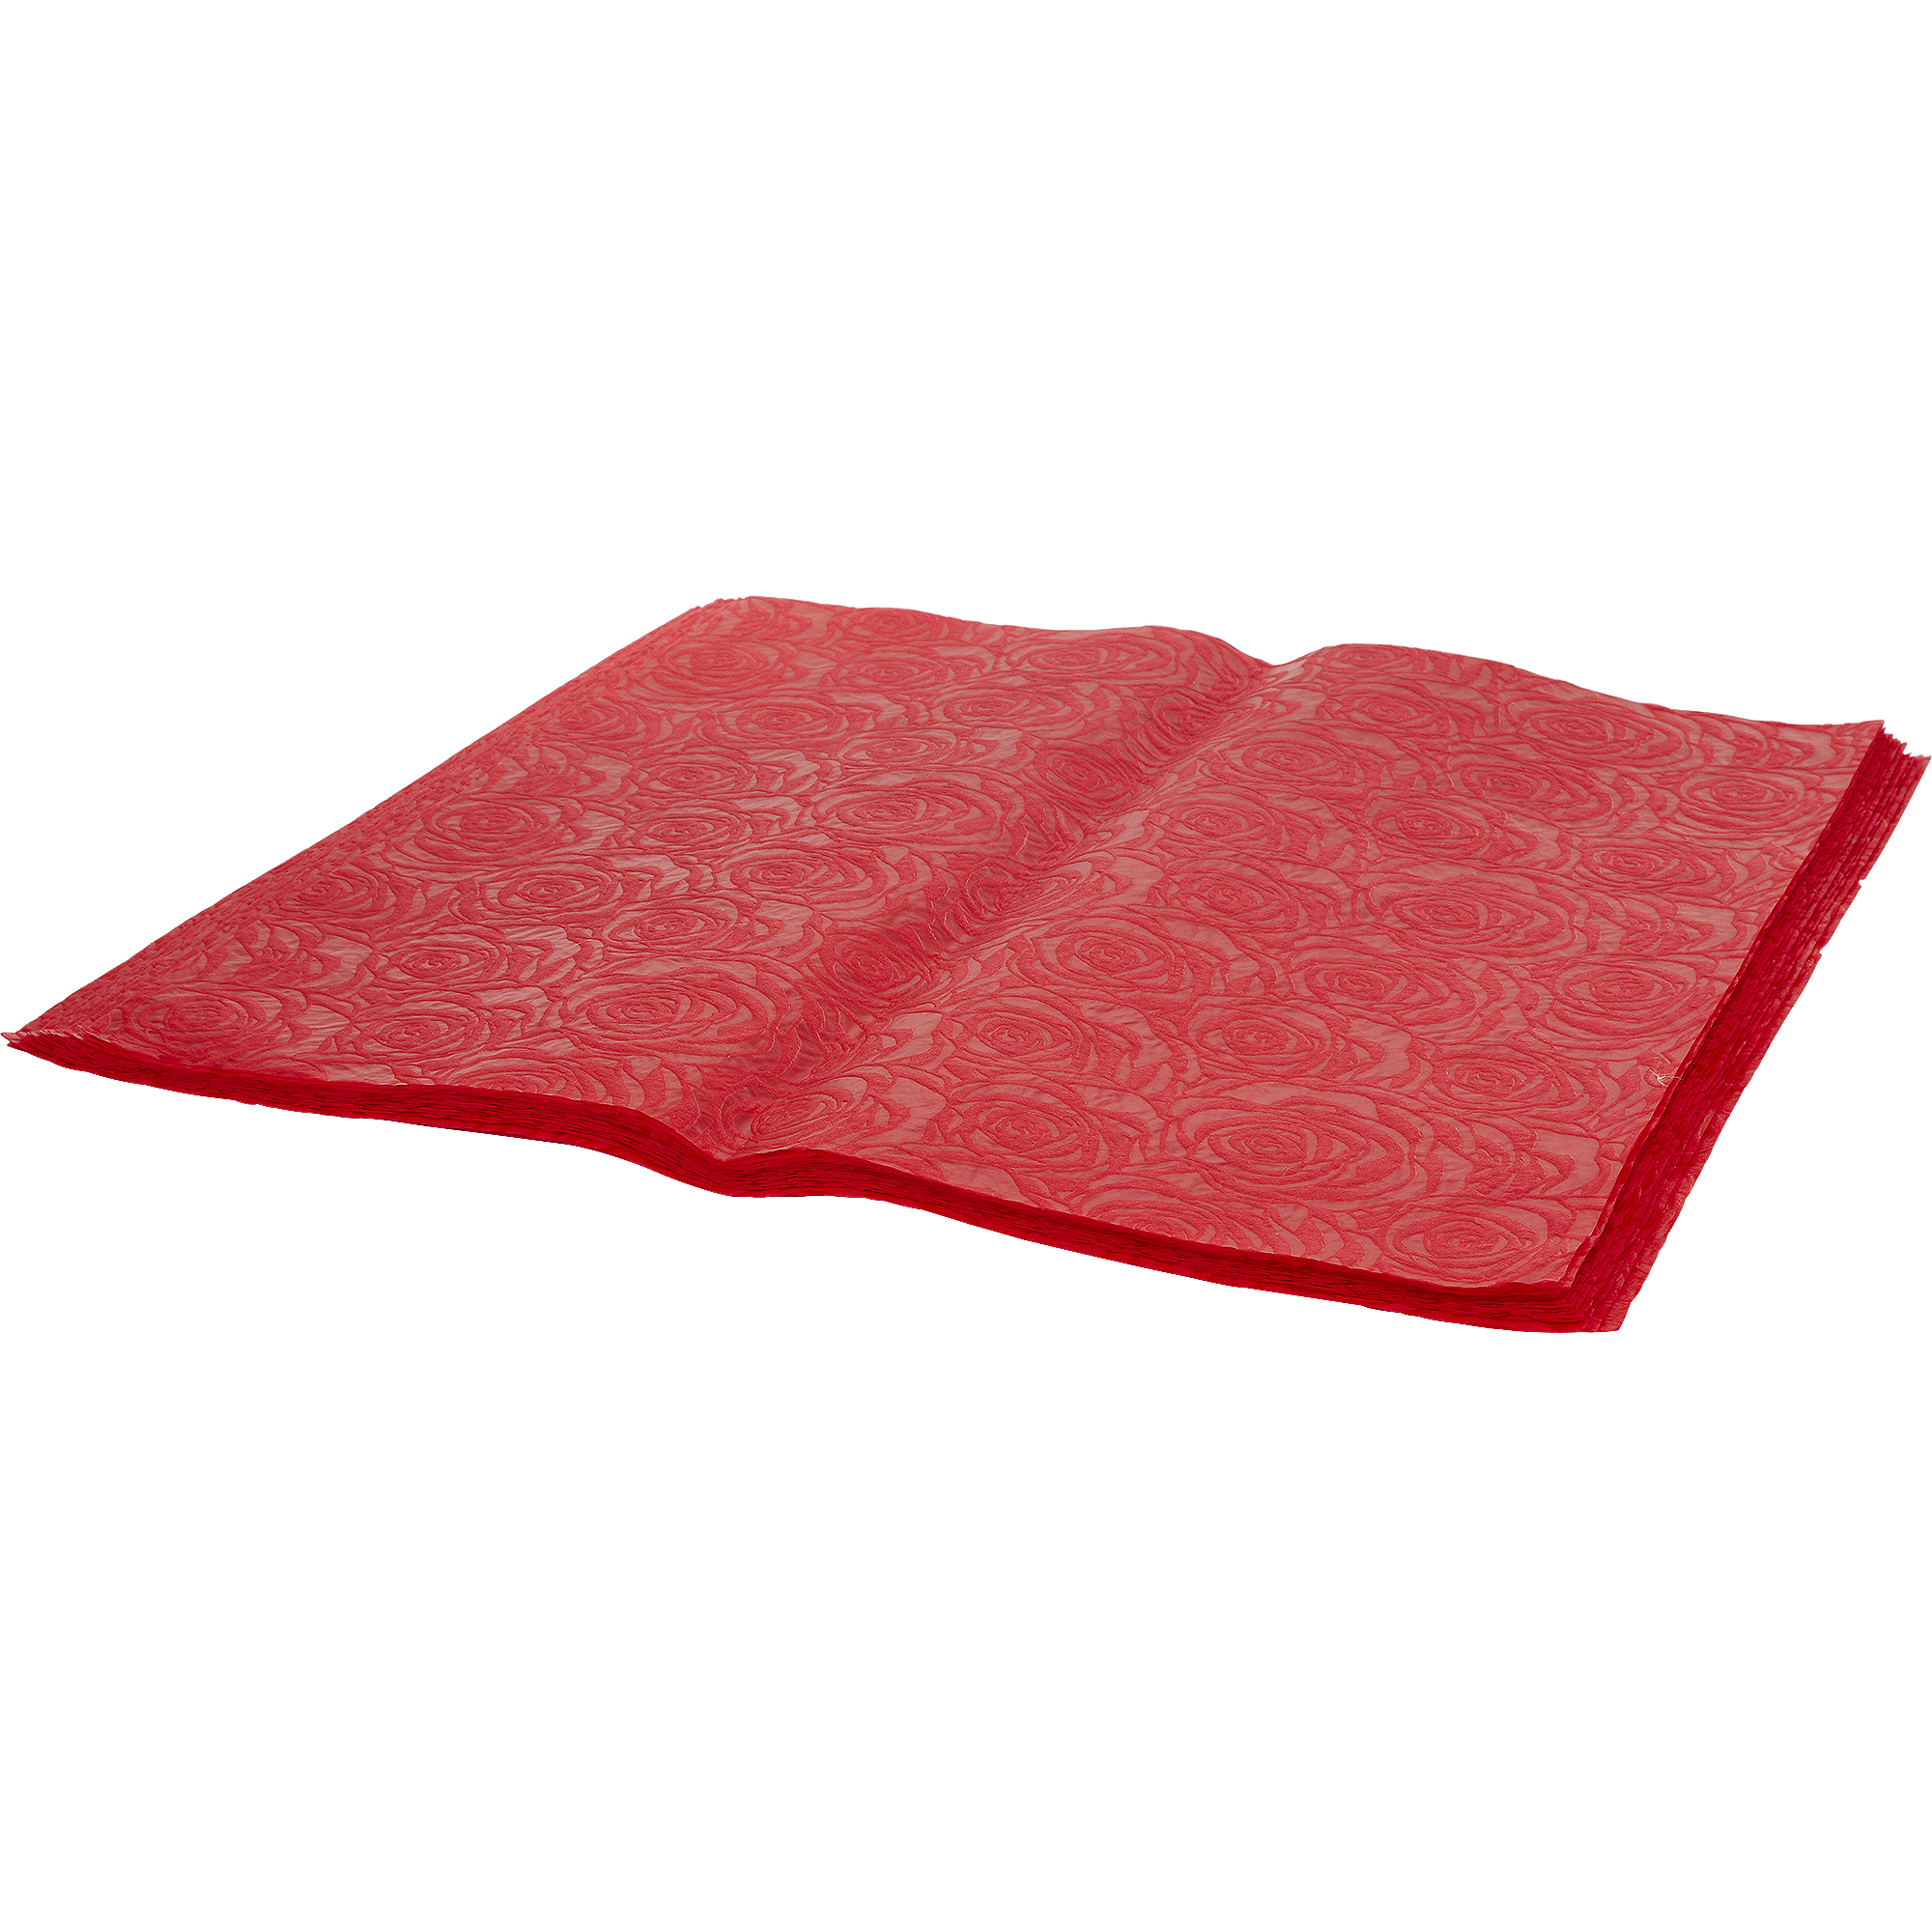 Embossed Nonwoven Floral Wrapping Paper 20pc/bag 21" x 22" - Red